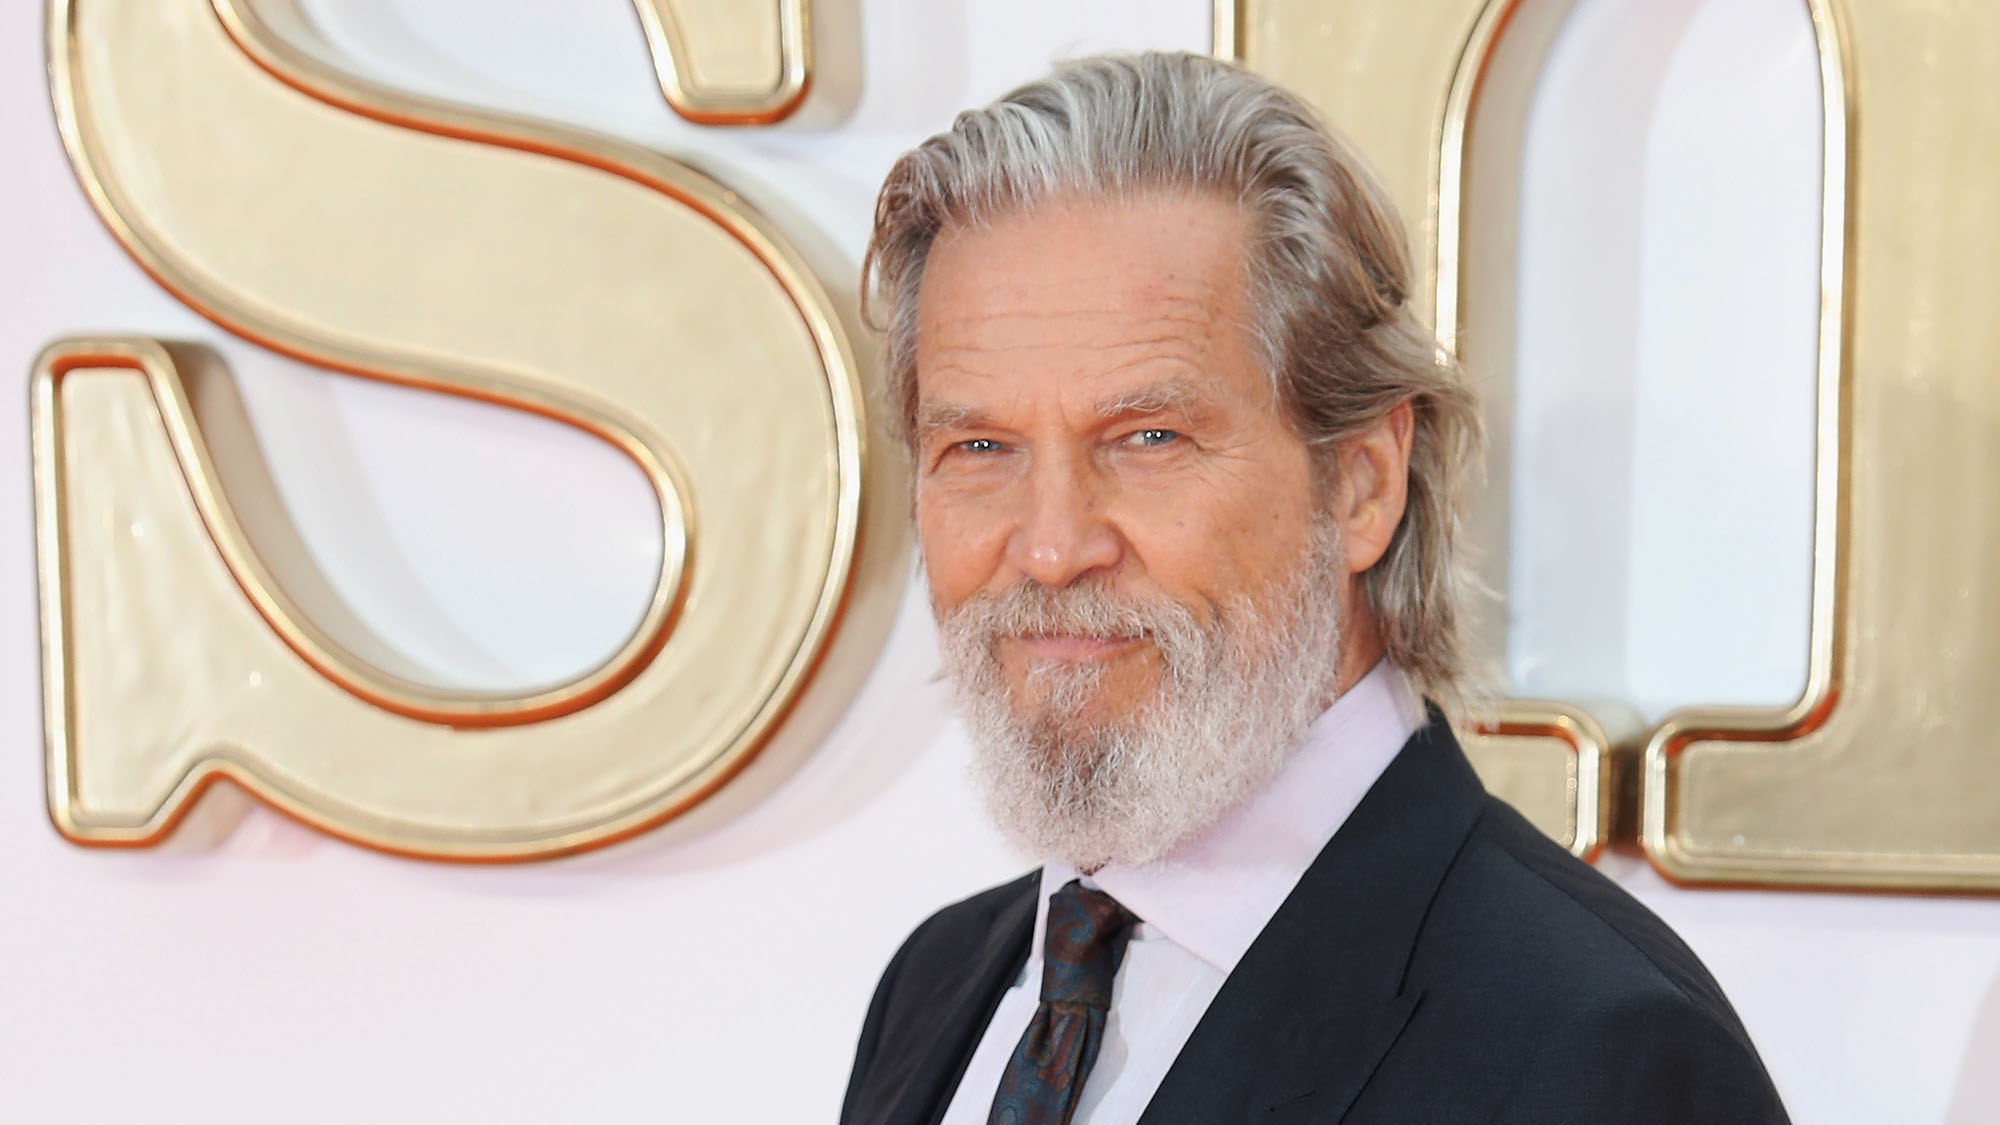 Jeff Bridges is Making His Way to TV for ‘The Old Man’ | Anglophenia